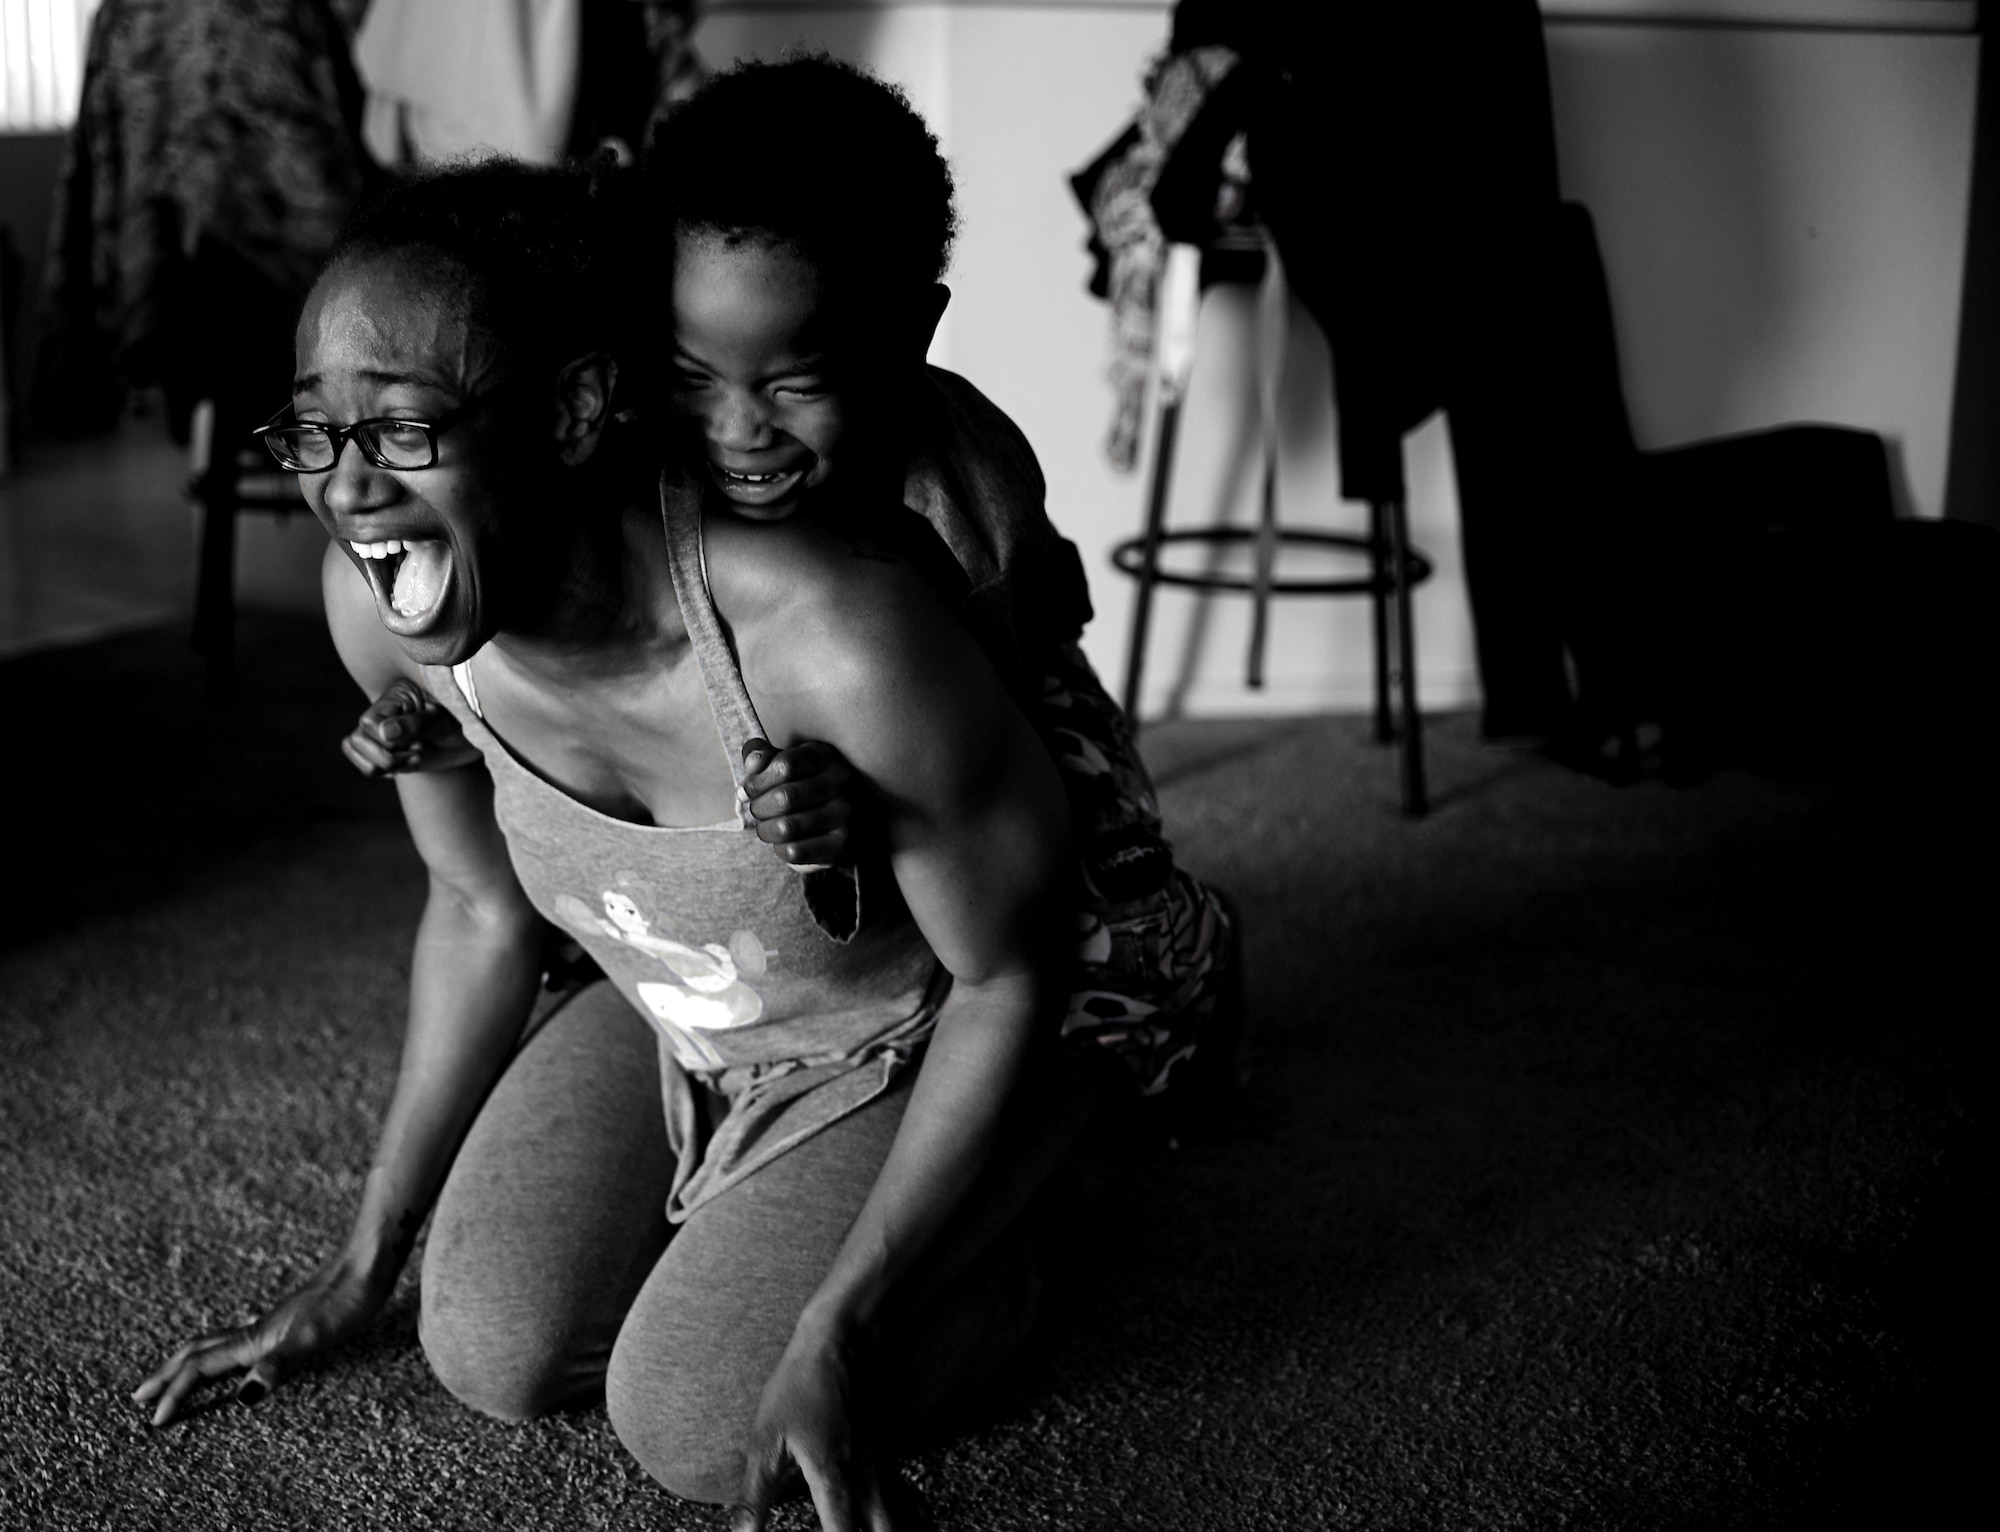 Semaj, 432nd Aircraft Maintenance Squadron supply craftsman, and her son Jamel, 6, play together April 2, 2017, at their home in Las Vegas. Semaj is able to compete successfully in women’s bodybuilding as a nationally qualified amateur while being a single mother. (U.S. Air Force photo/Senior Airman Christian Clausen)